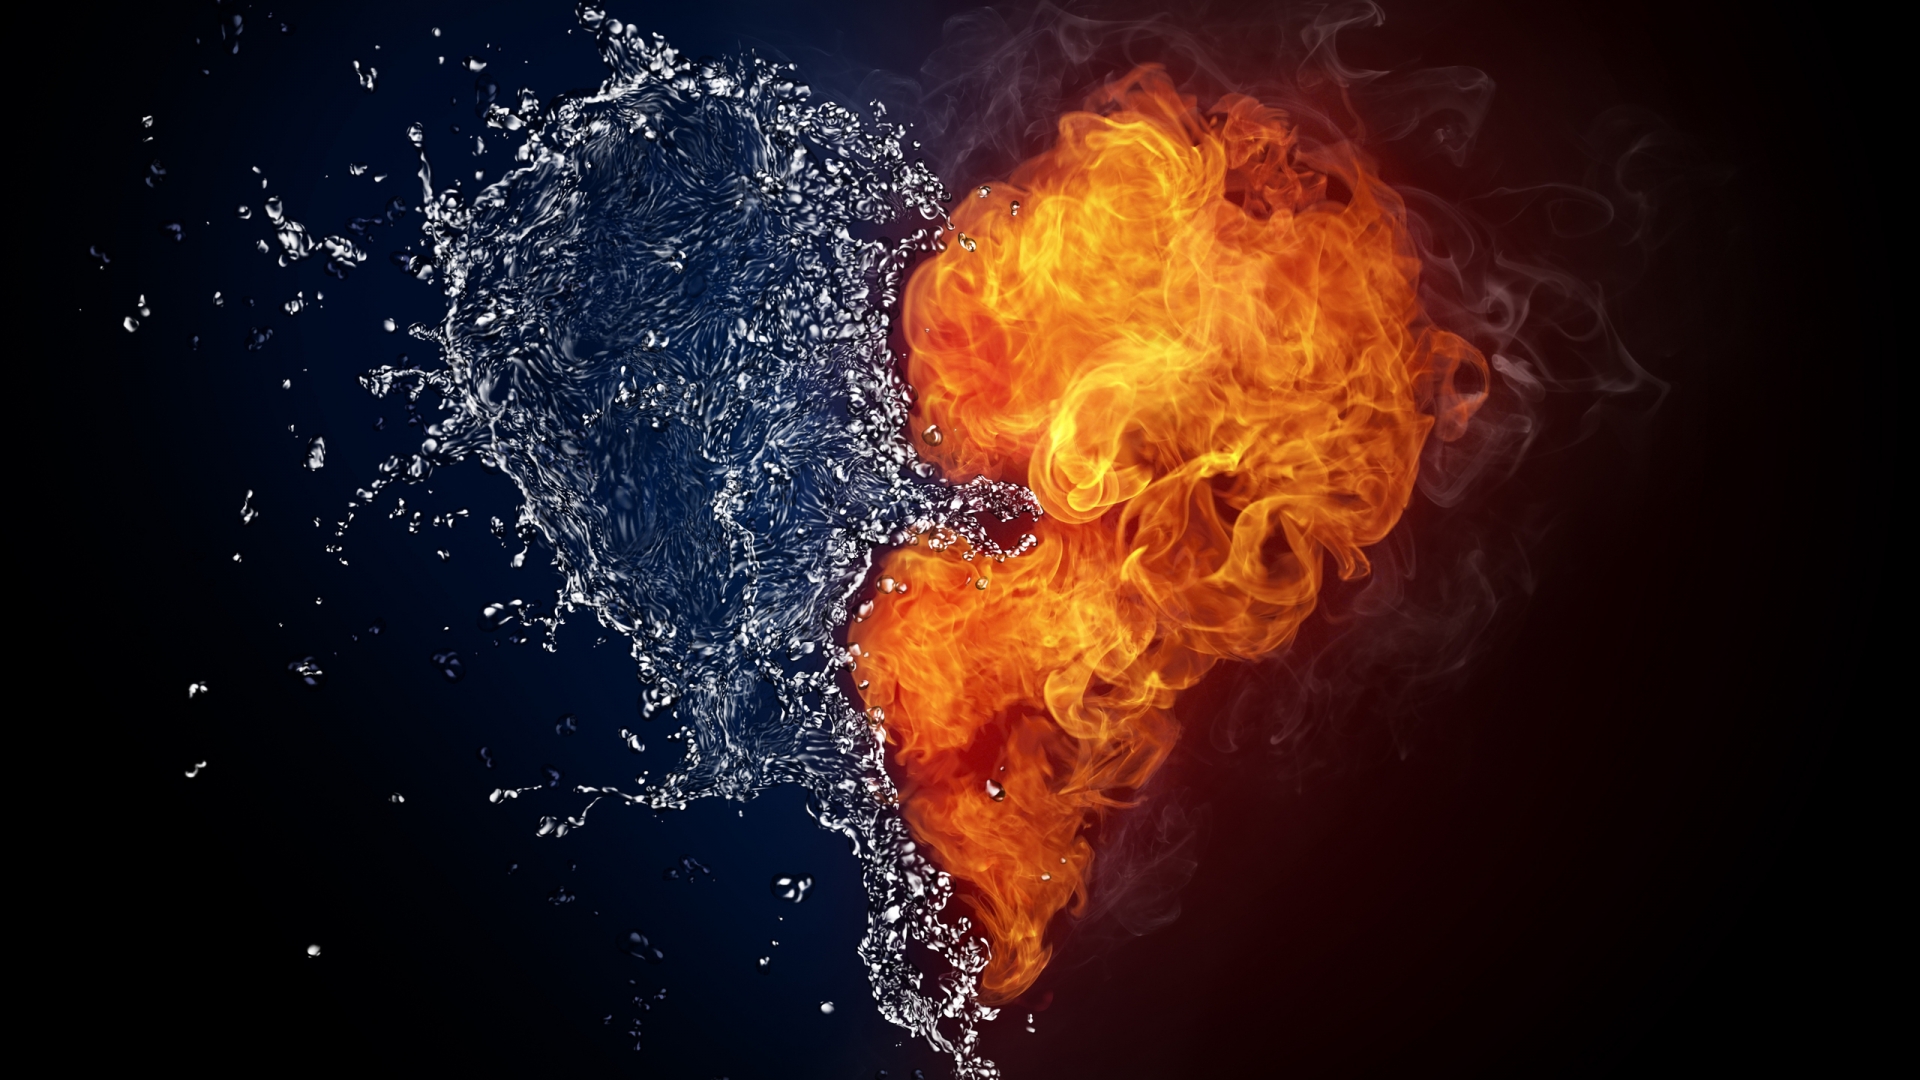 Water and Fire Love for 1920 x 1080 HDTV 1080p resolution